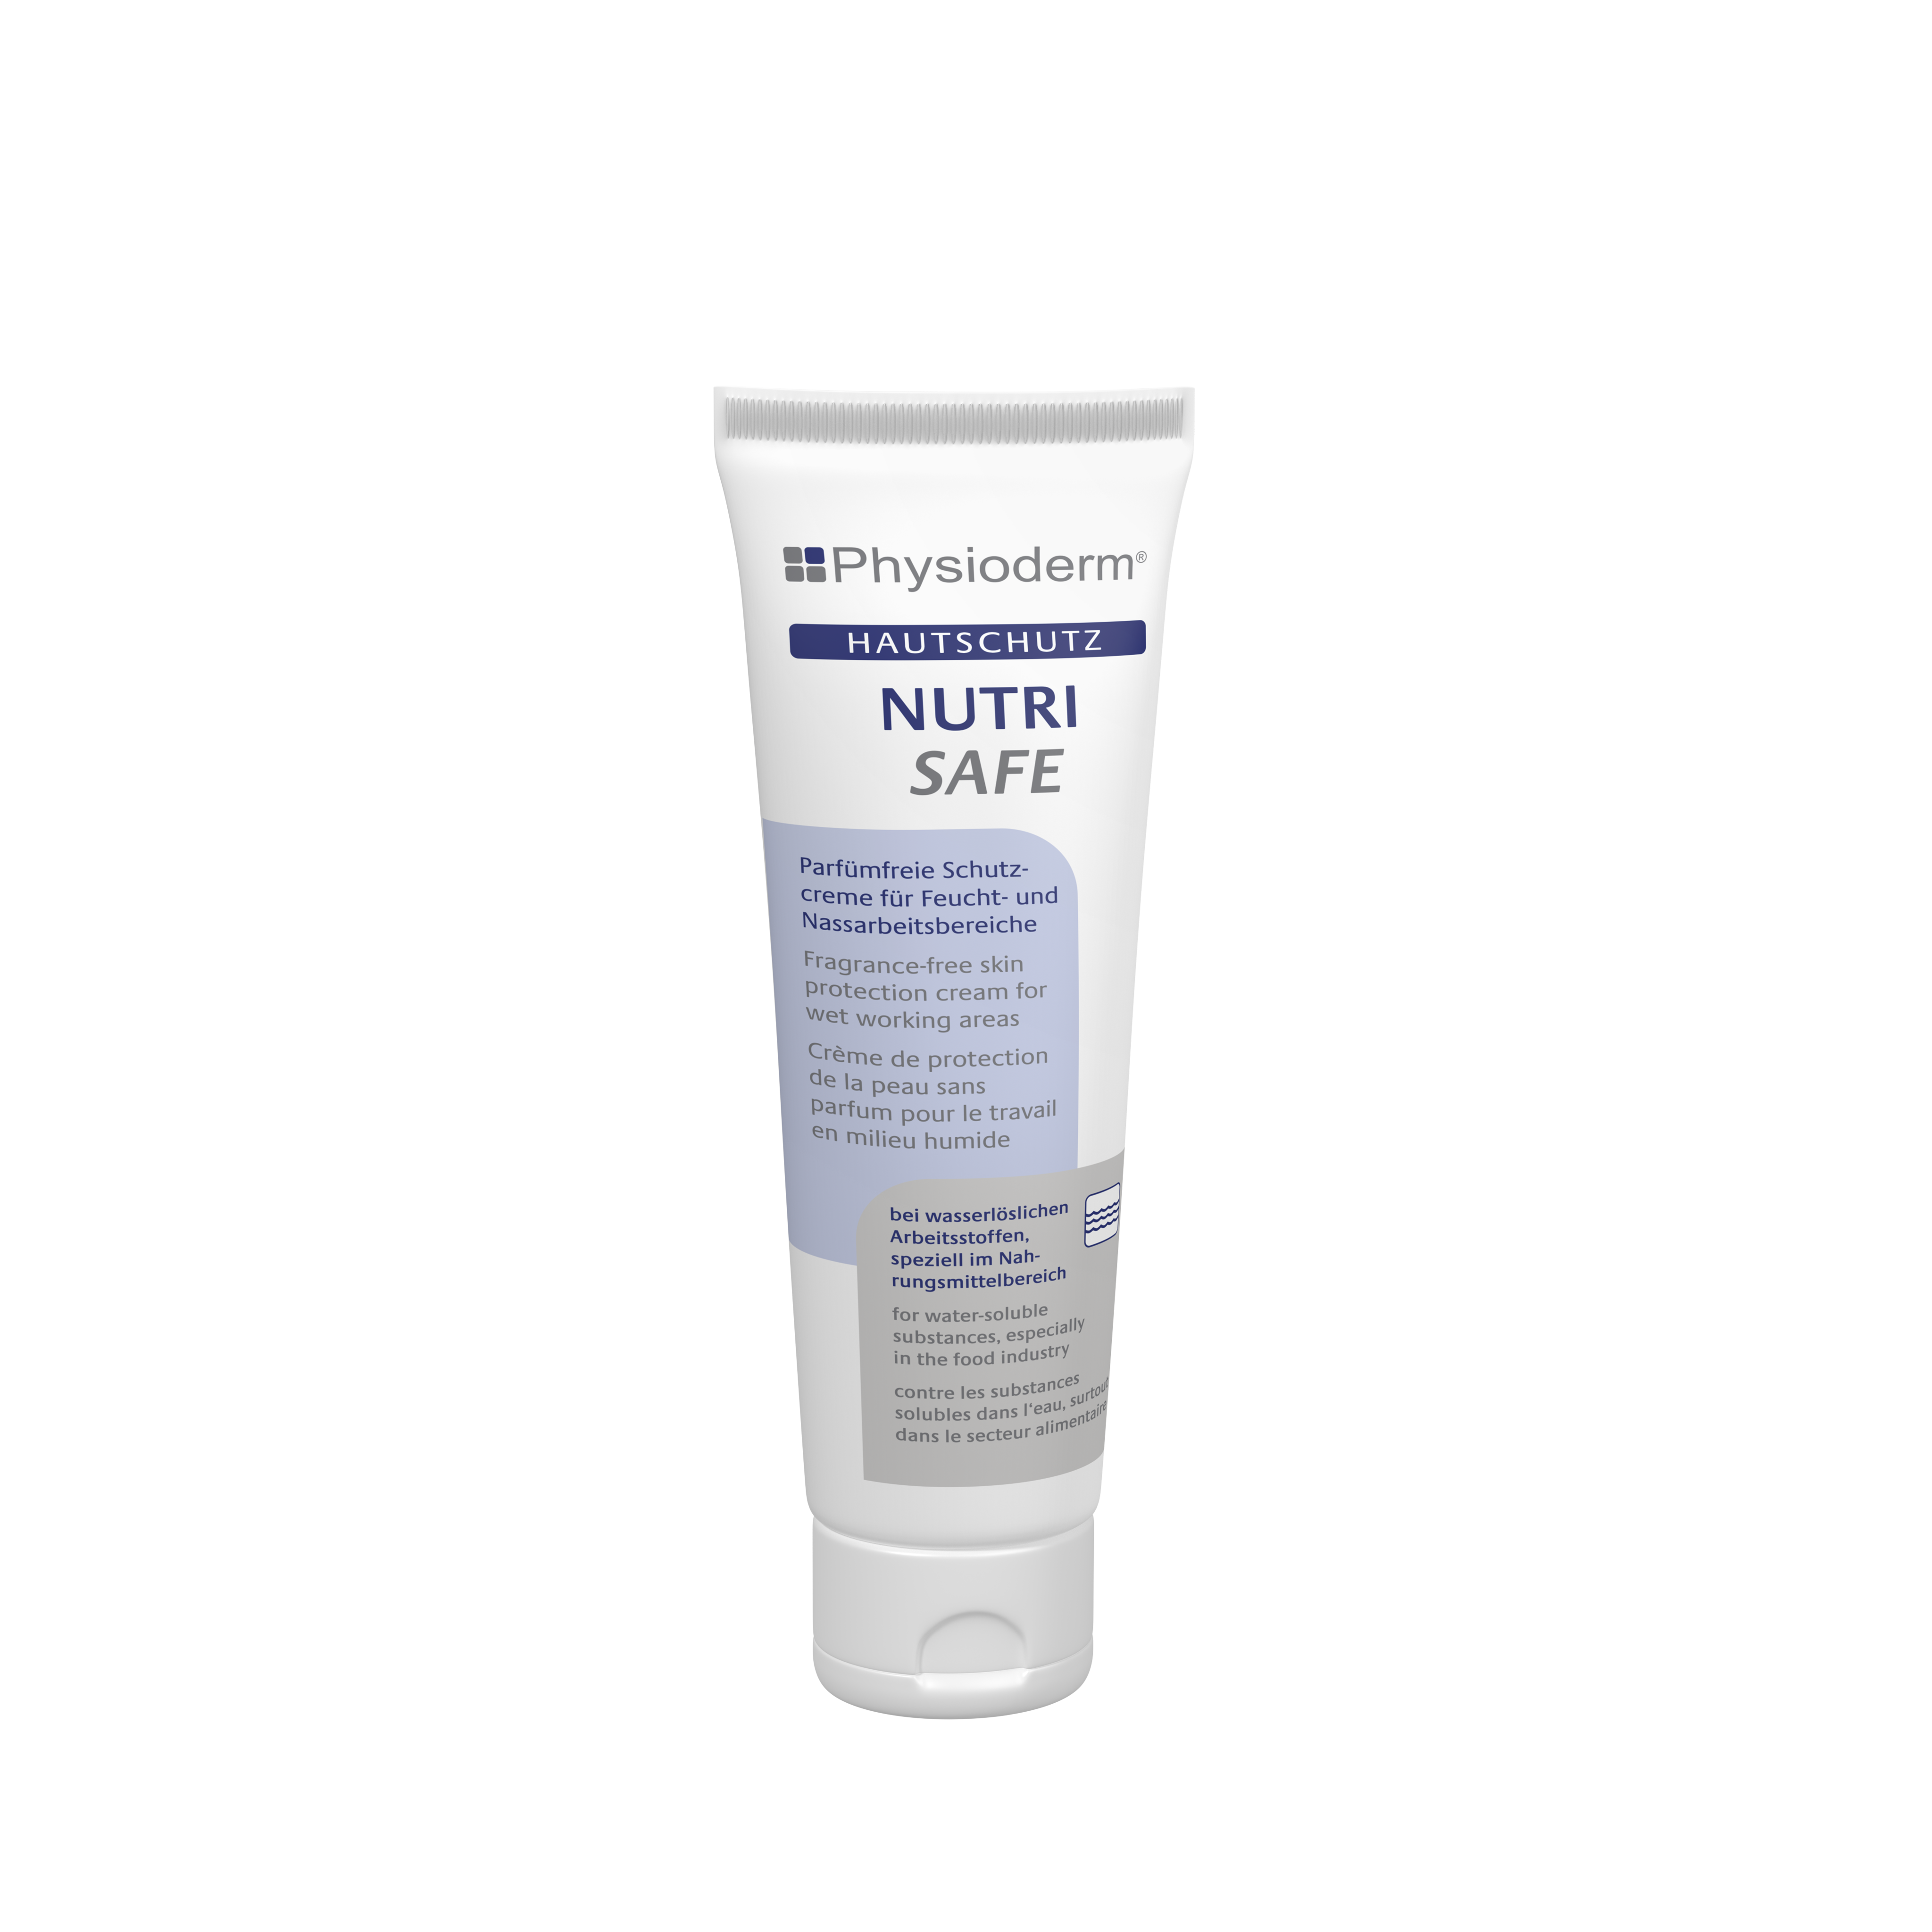  Physioderm Nutri Safe 100ML (Water Soluble), Rapid absorption skin protection gel  Properties:  Food secure  Rapid absorption  Silicone-free.  Fragrance- and perfume-free.  HACCP-compliant.